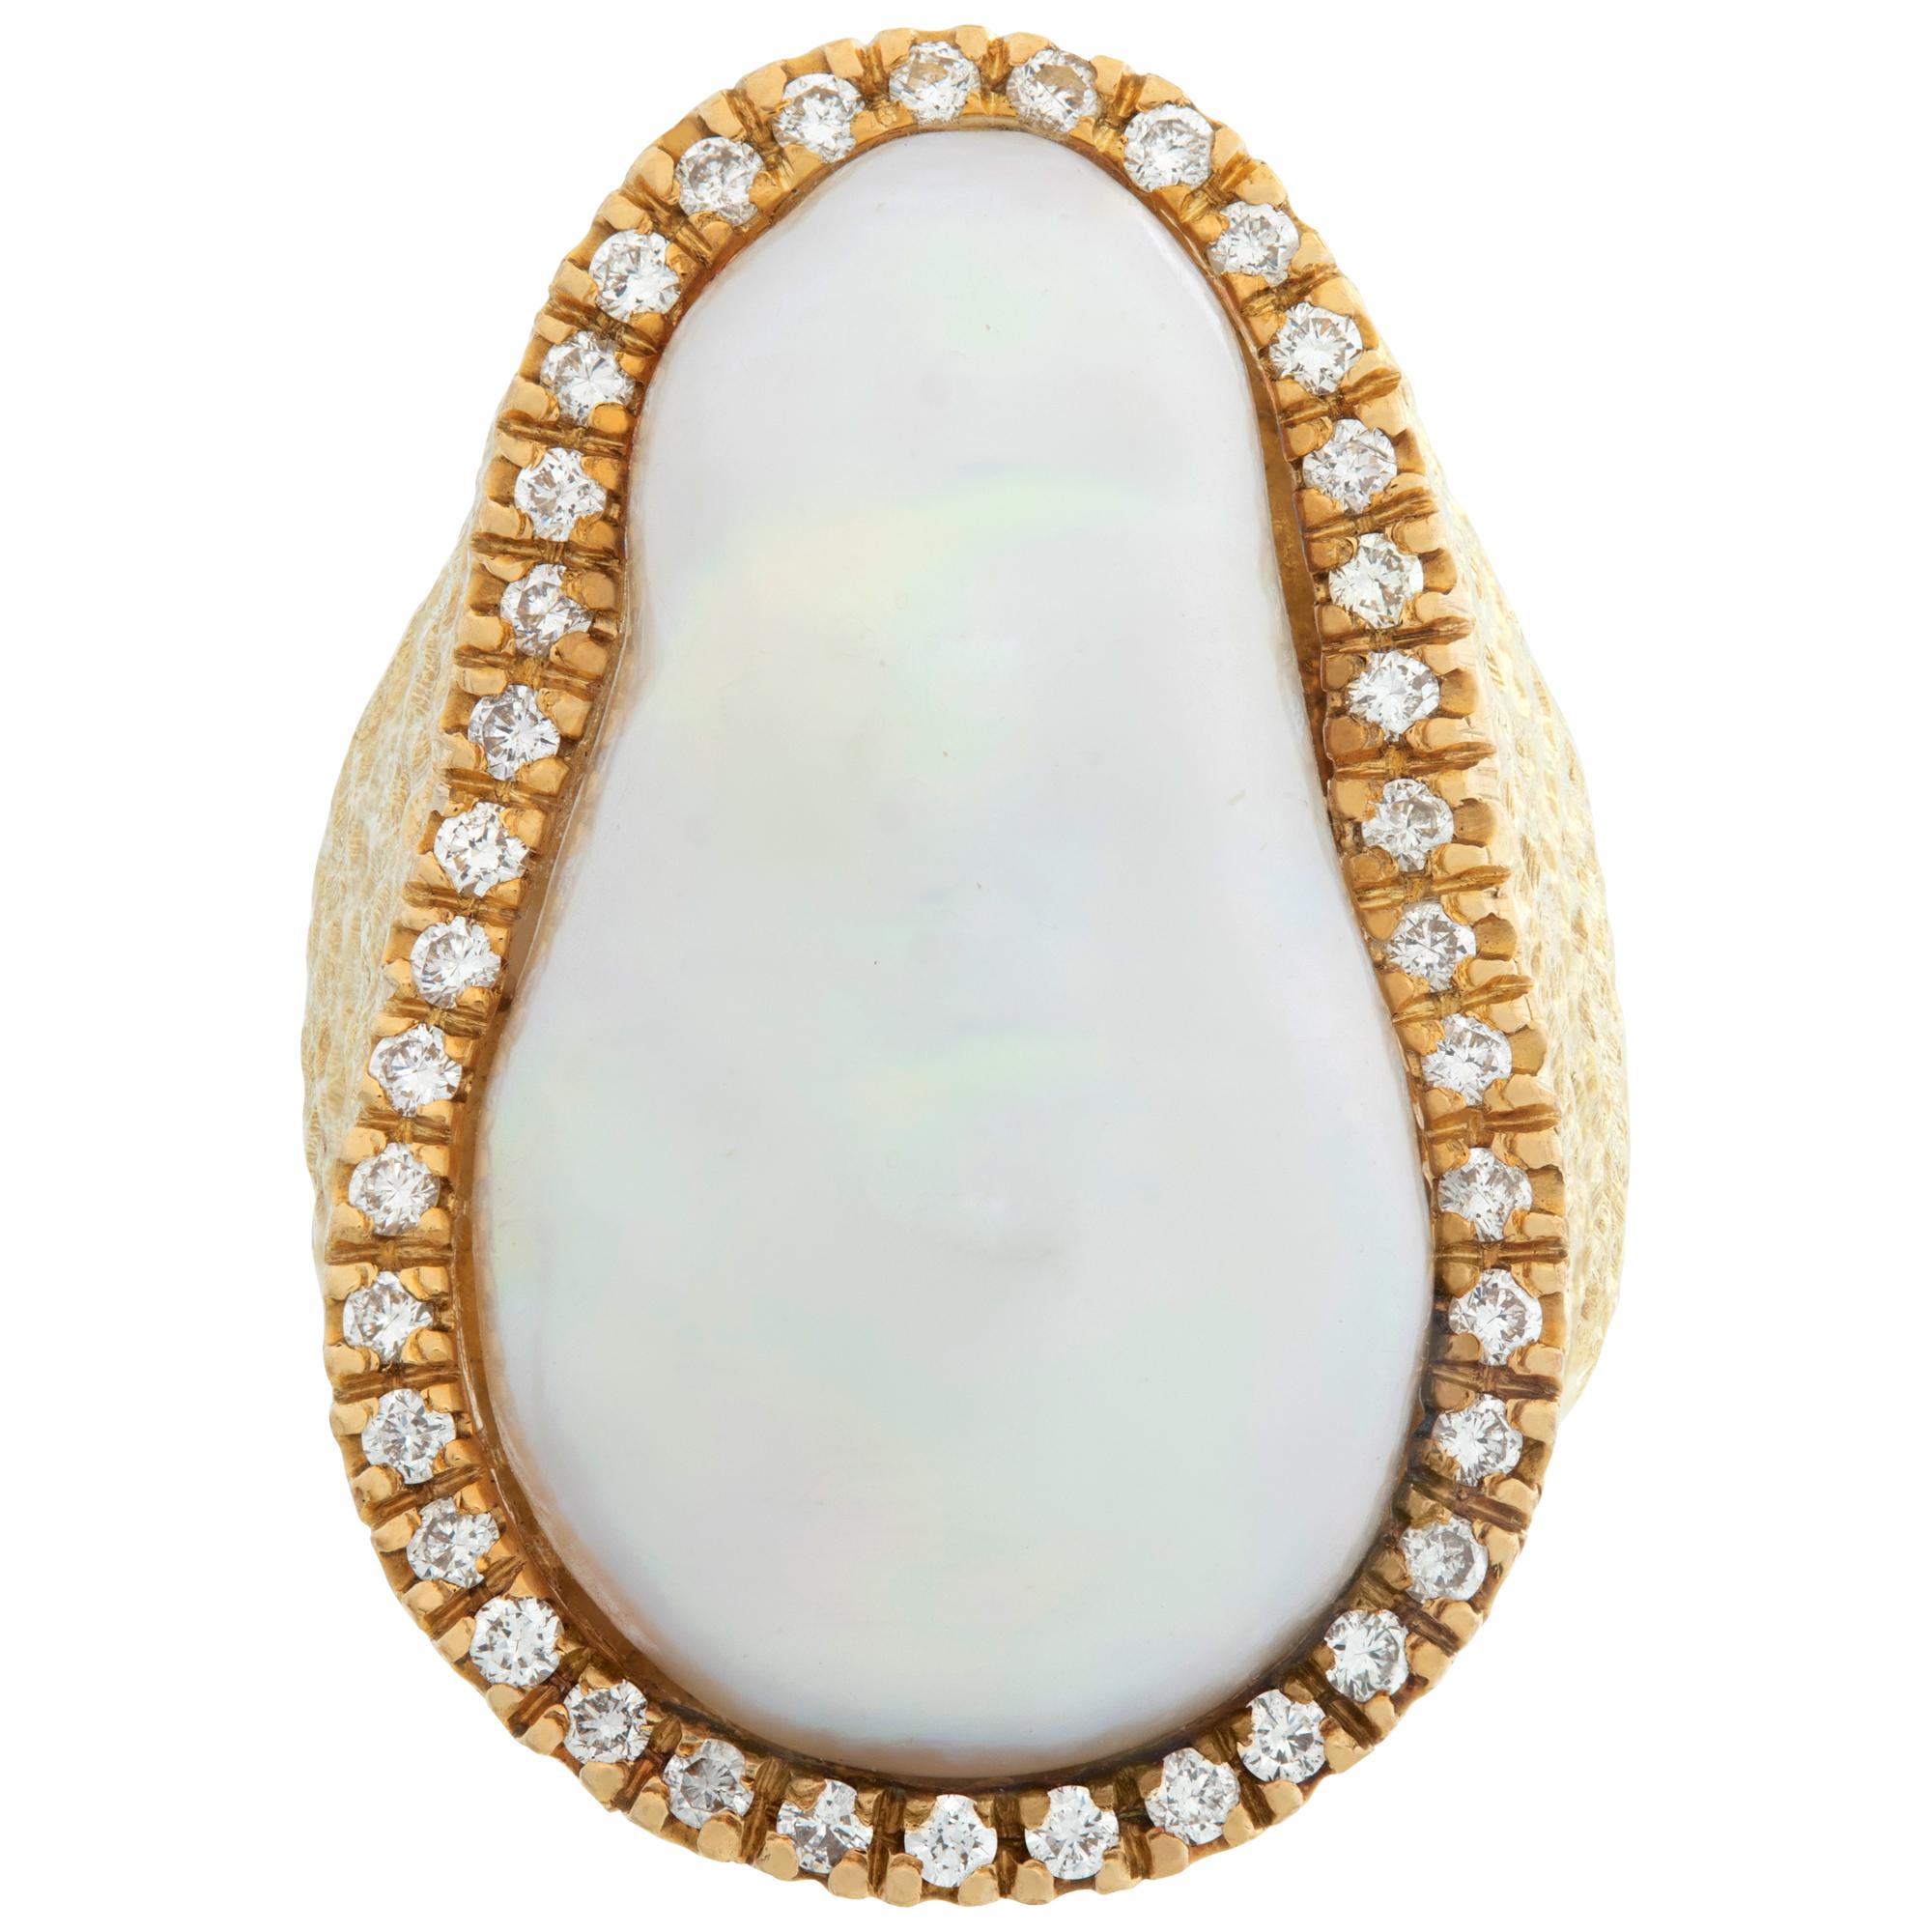 Baroque Mabe pearl (over 18mm)  & diamonds ring in 18K yellow gold. Round brilliant cut diamonds total approx. weight: 0.57 carat, estimate: G-H color, VS clarity. Size 6.This Pearl/diamond ring is currently size 6 and some items can be sized up or